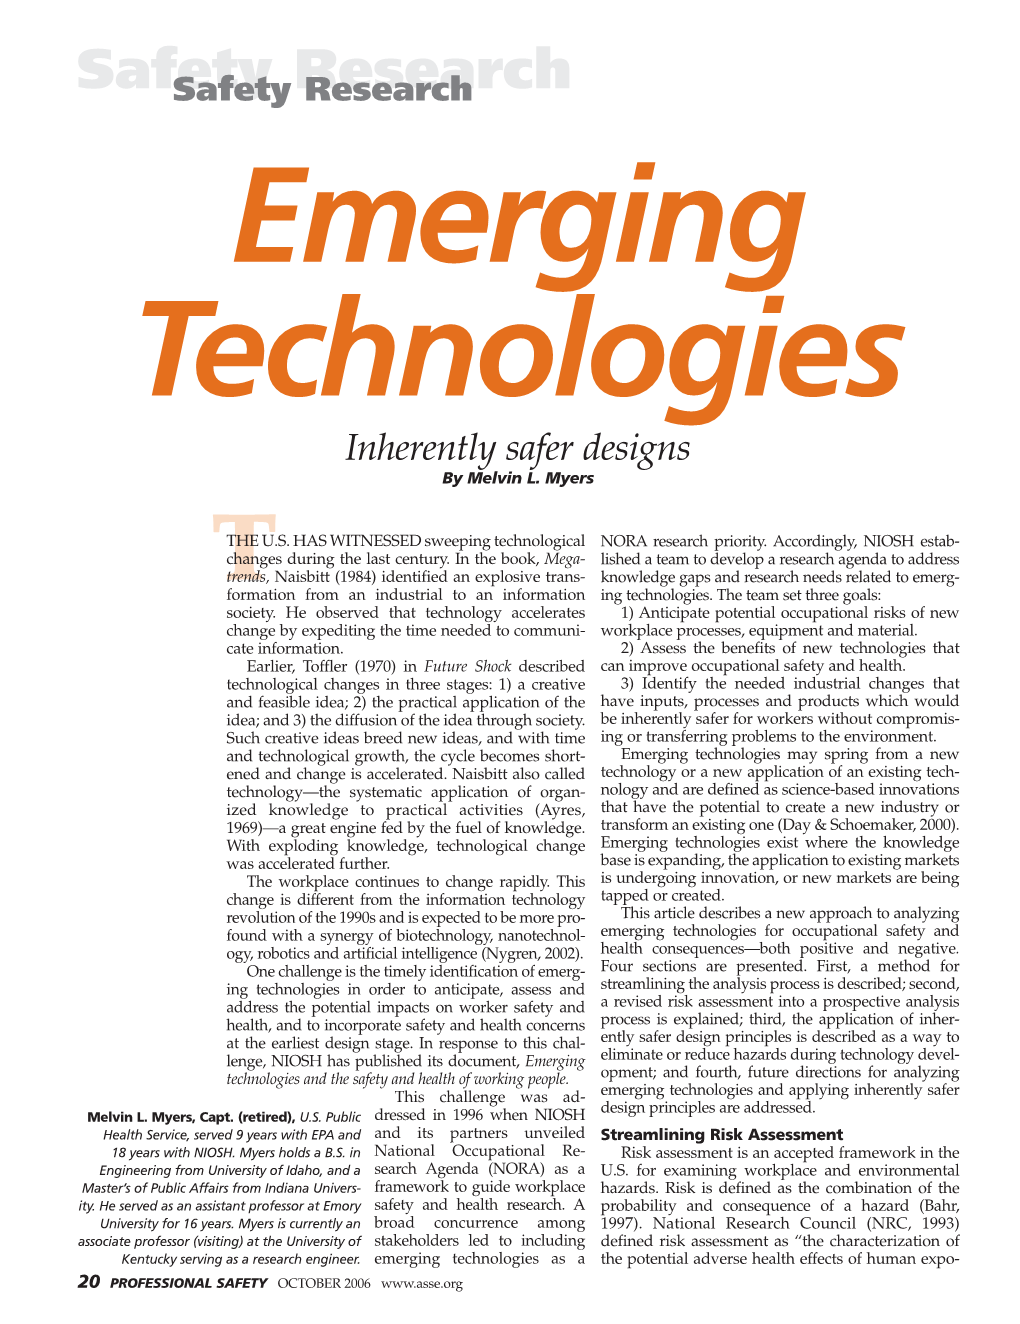 Safety Researchresearch Emerging Technologies Inherently Safer Designs by Melvin L